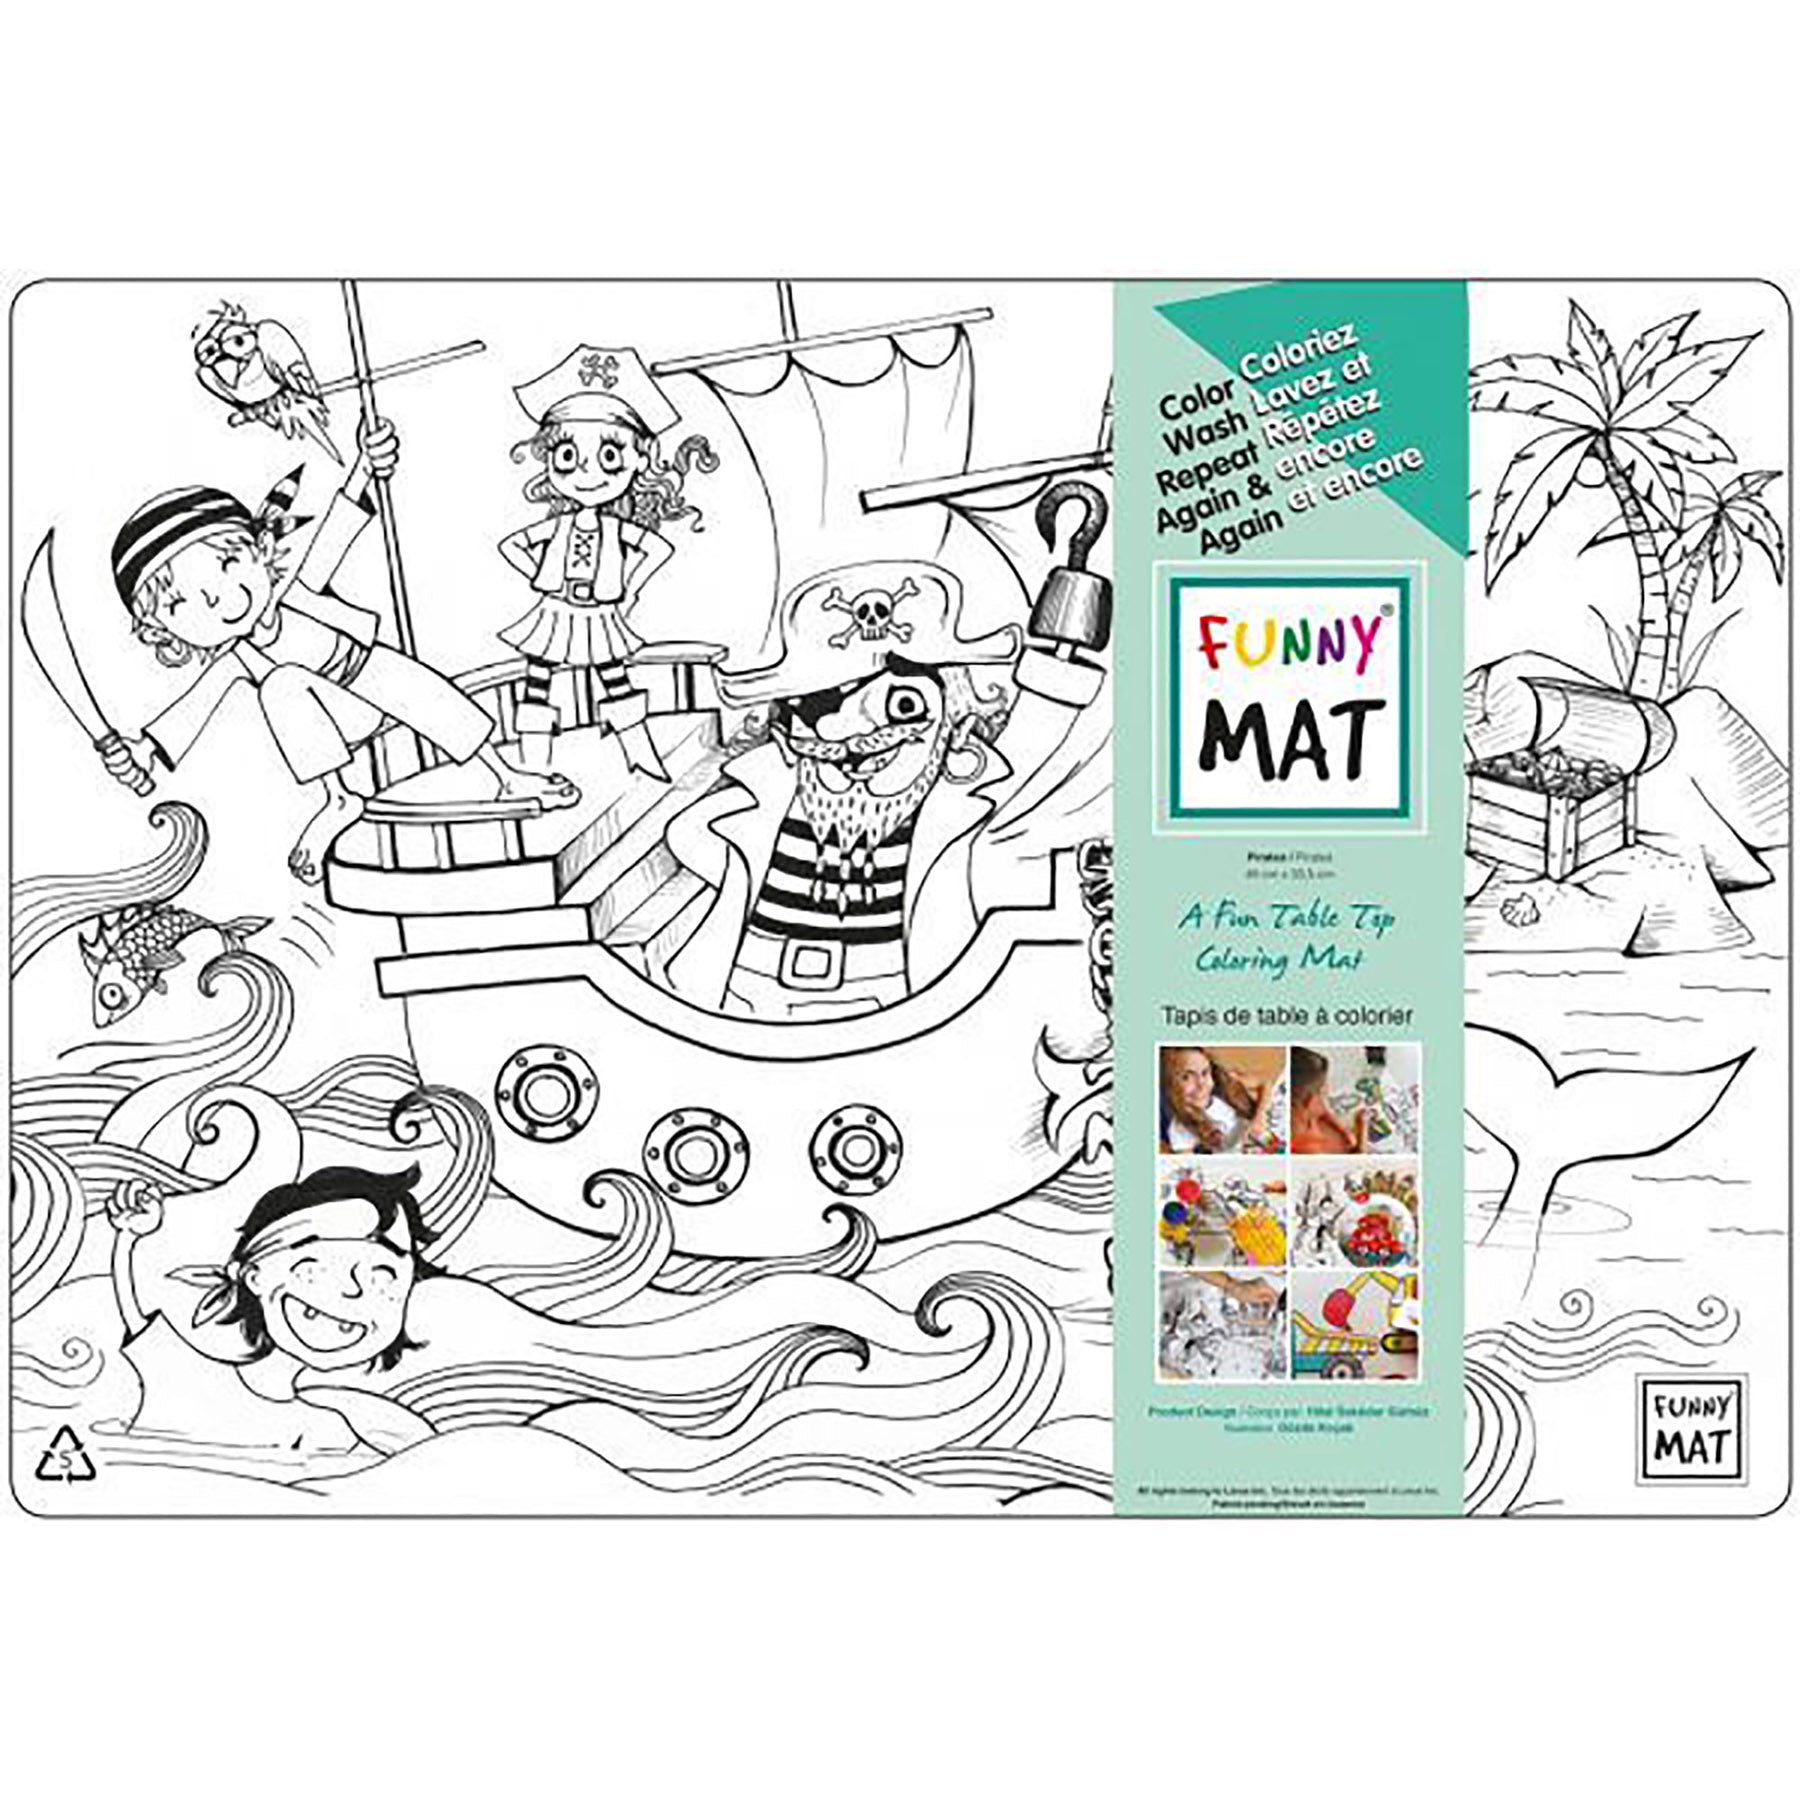 Funny Mat Coloring Placemat - Pirates 18.9x13.2in